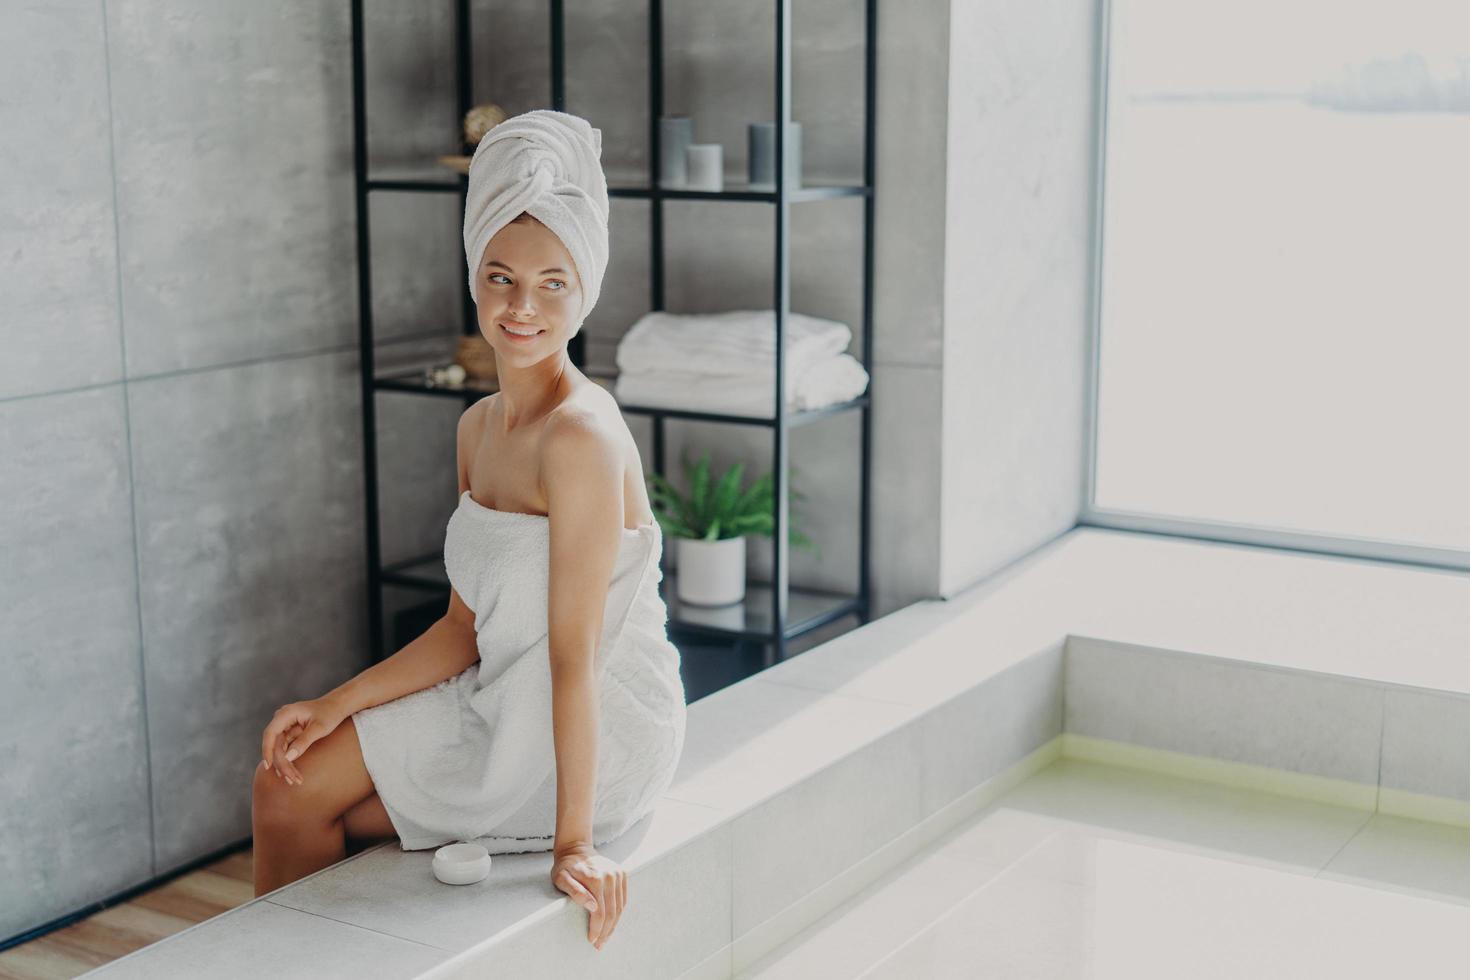 Beauty model with healthy perfect skin applies cream for body care, poses wrapped in towel after taking shower, poses at bathtube, looks thoughtfully away, feels refreshed and relaxed. Spa procedures photo